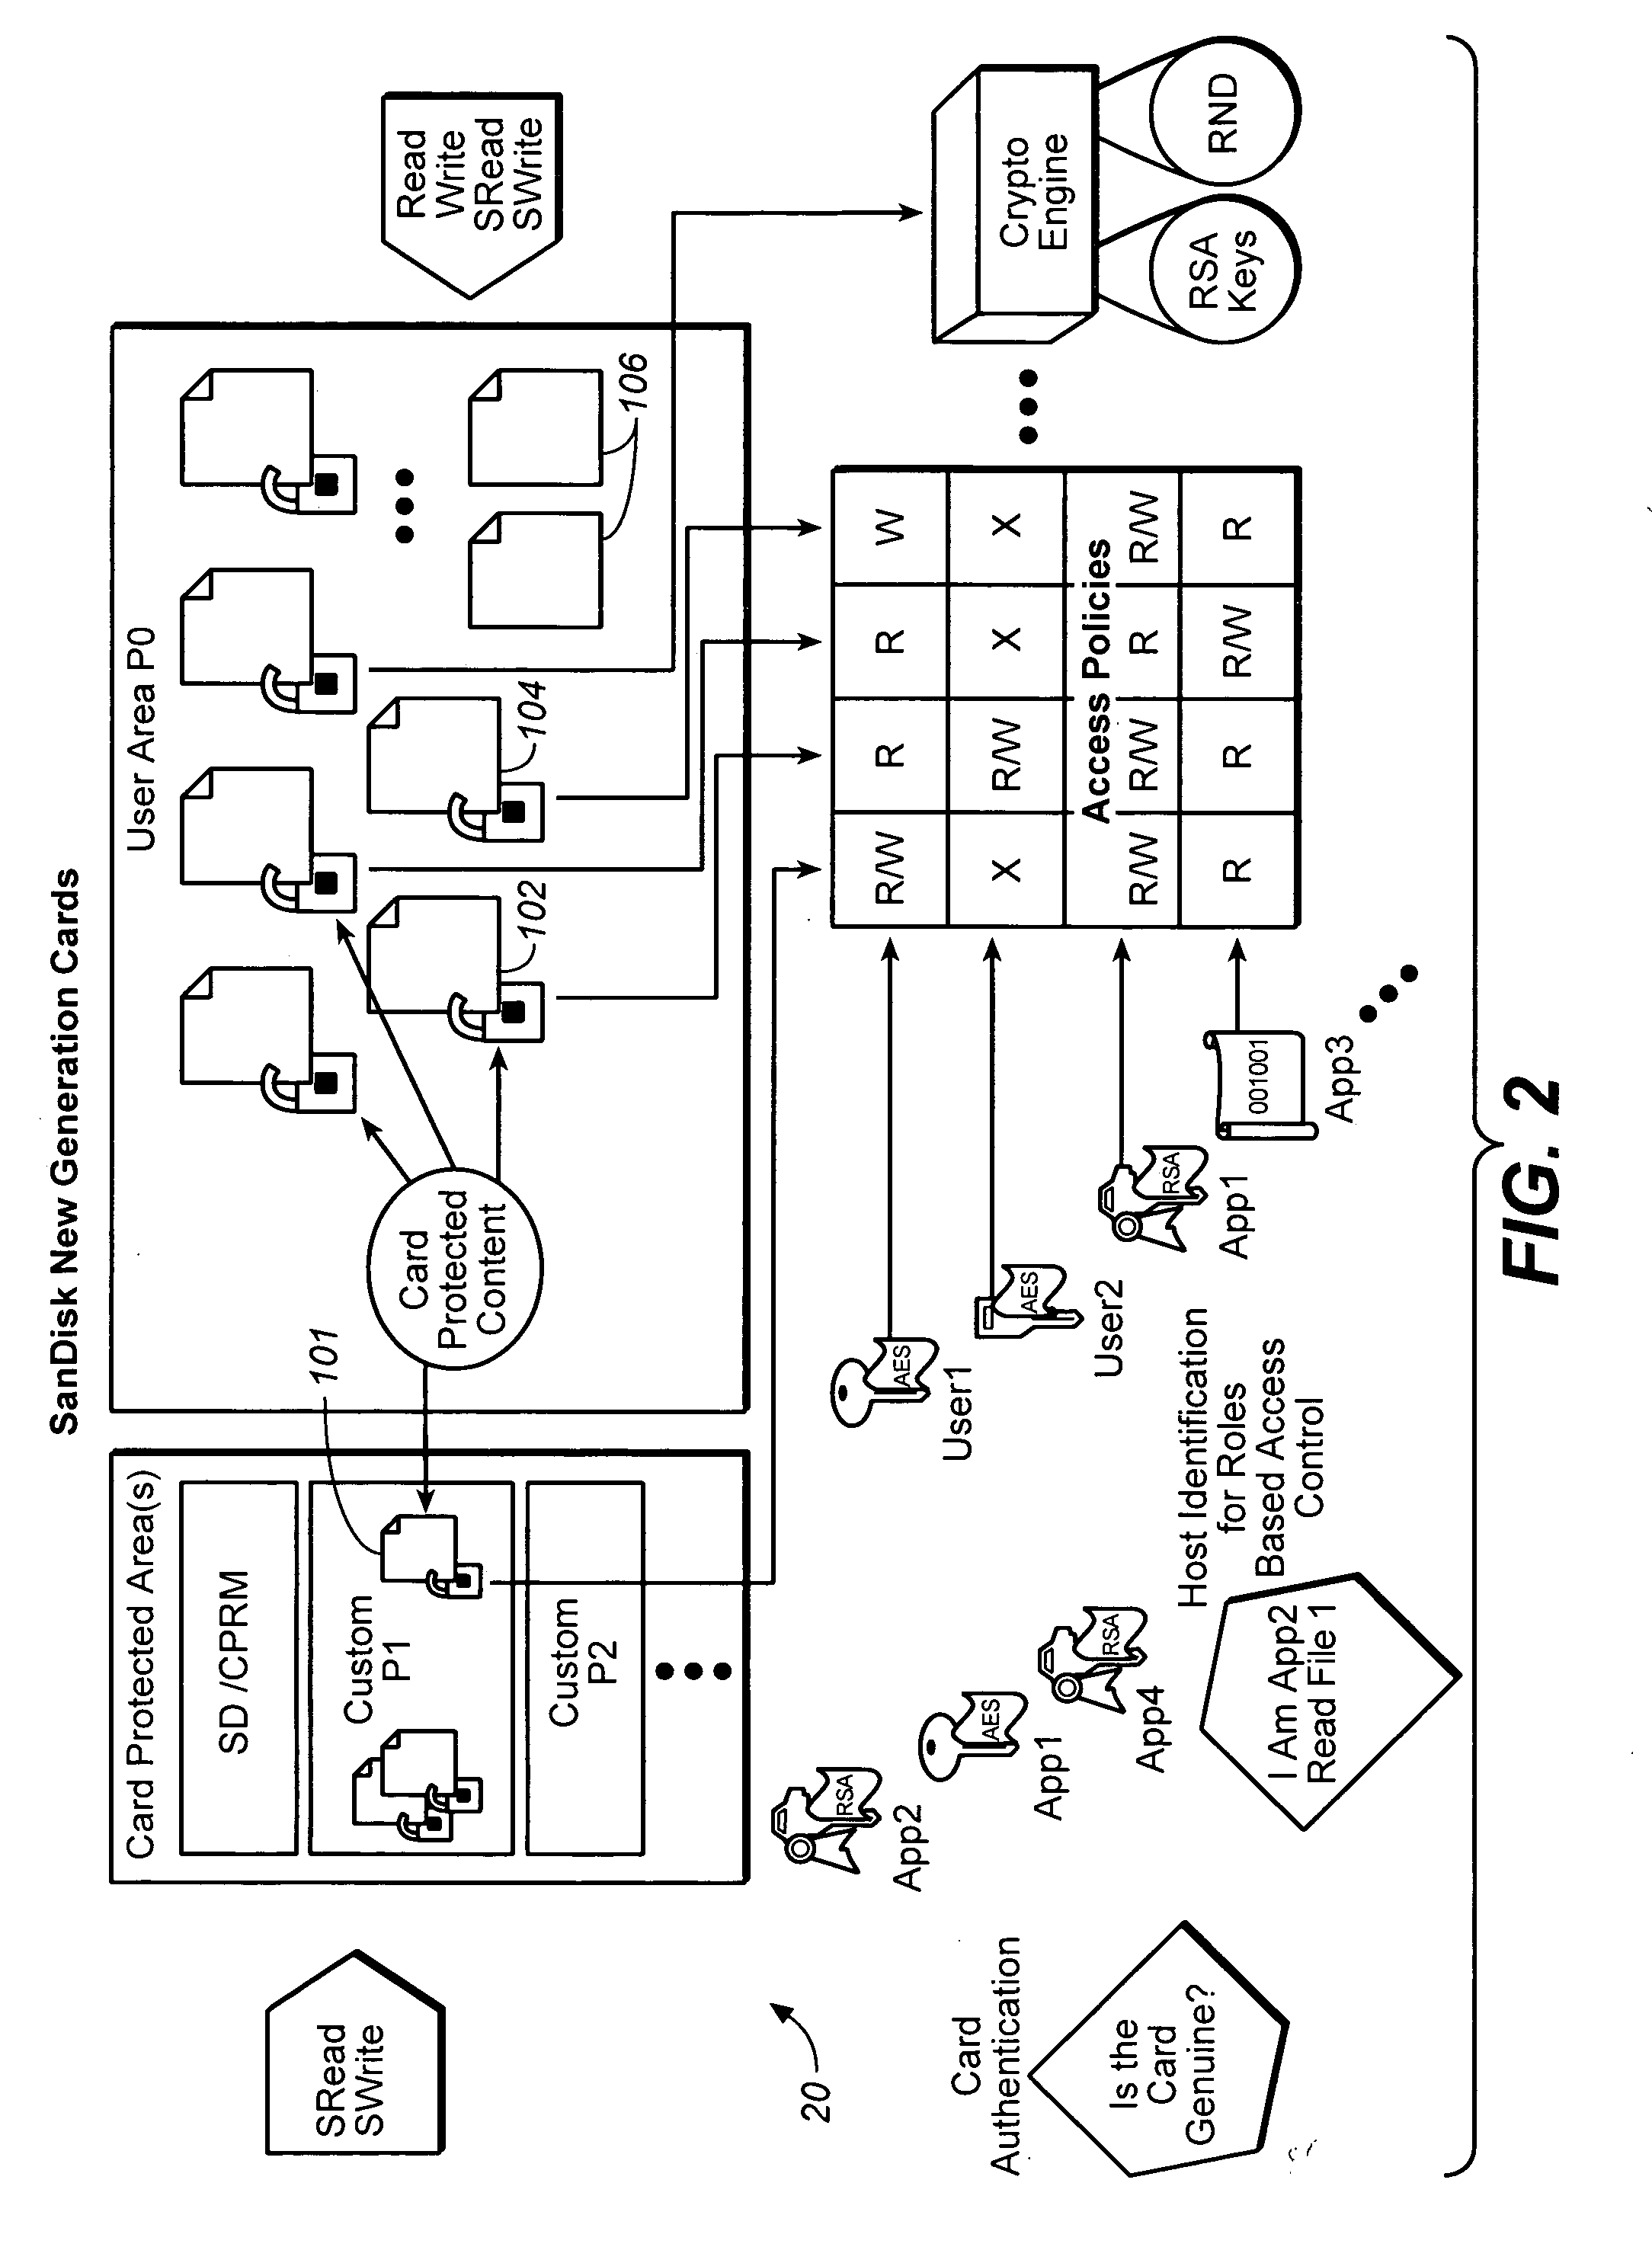 Method for secure storage and delivery of media content